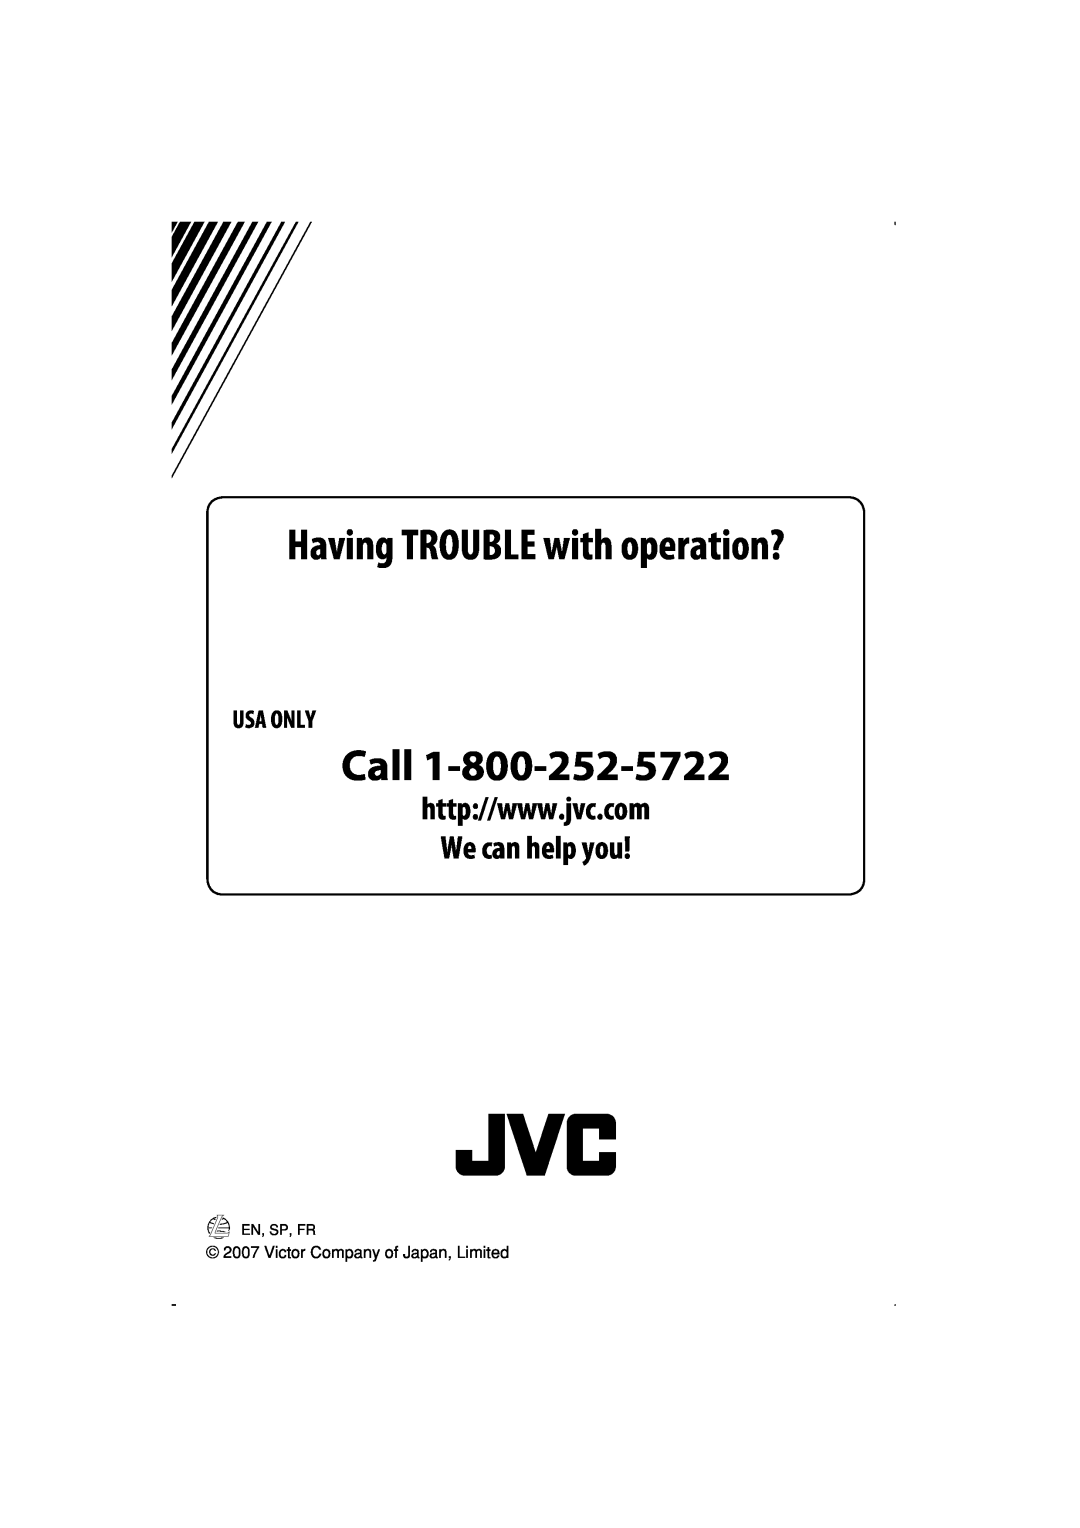 JVC KS-SRA100 manual Usa Only, Call, Having TROUBLE with operation?, Victor Company of Japan, Limited, En, Sp, Fr 